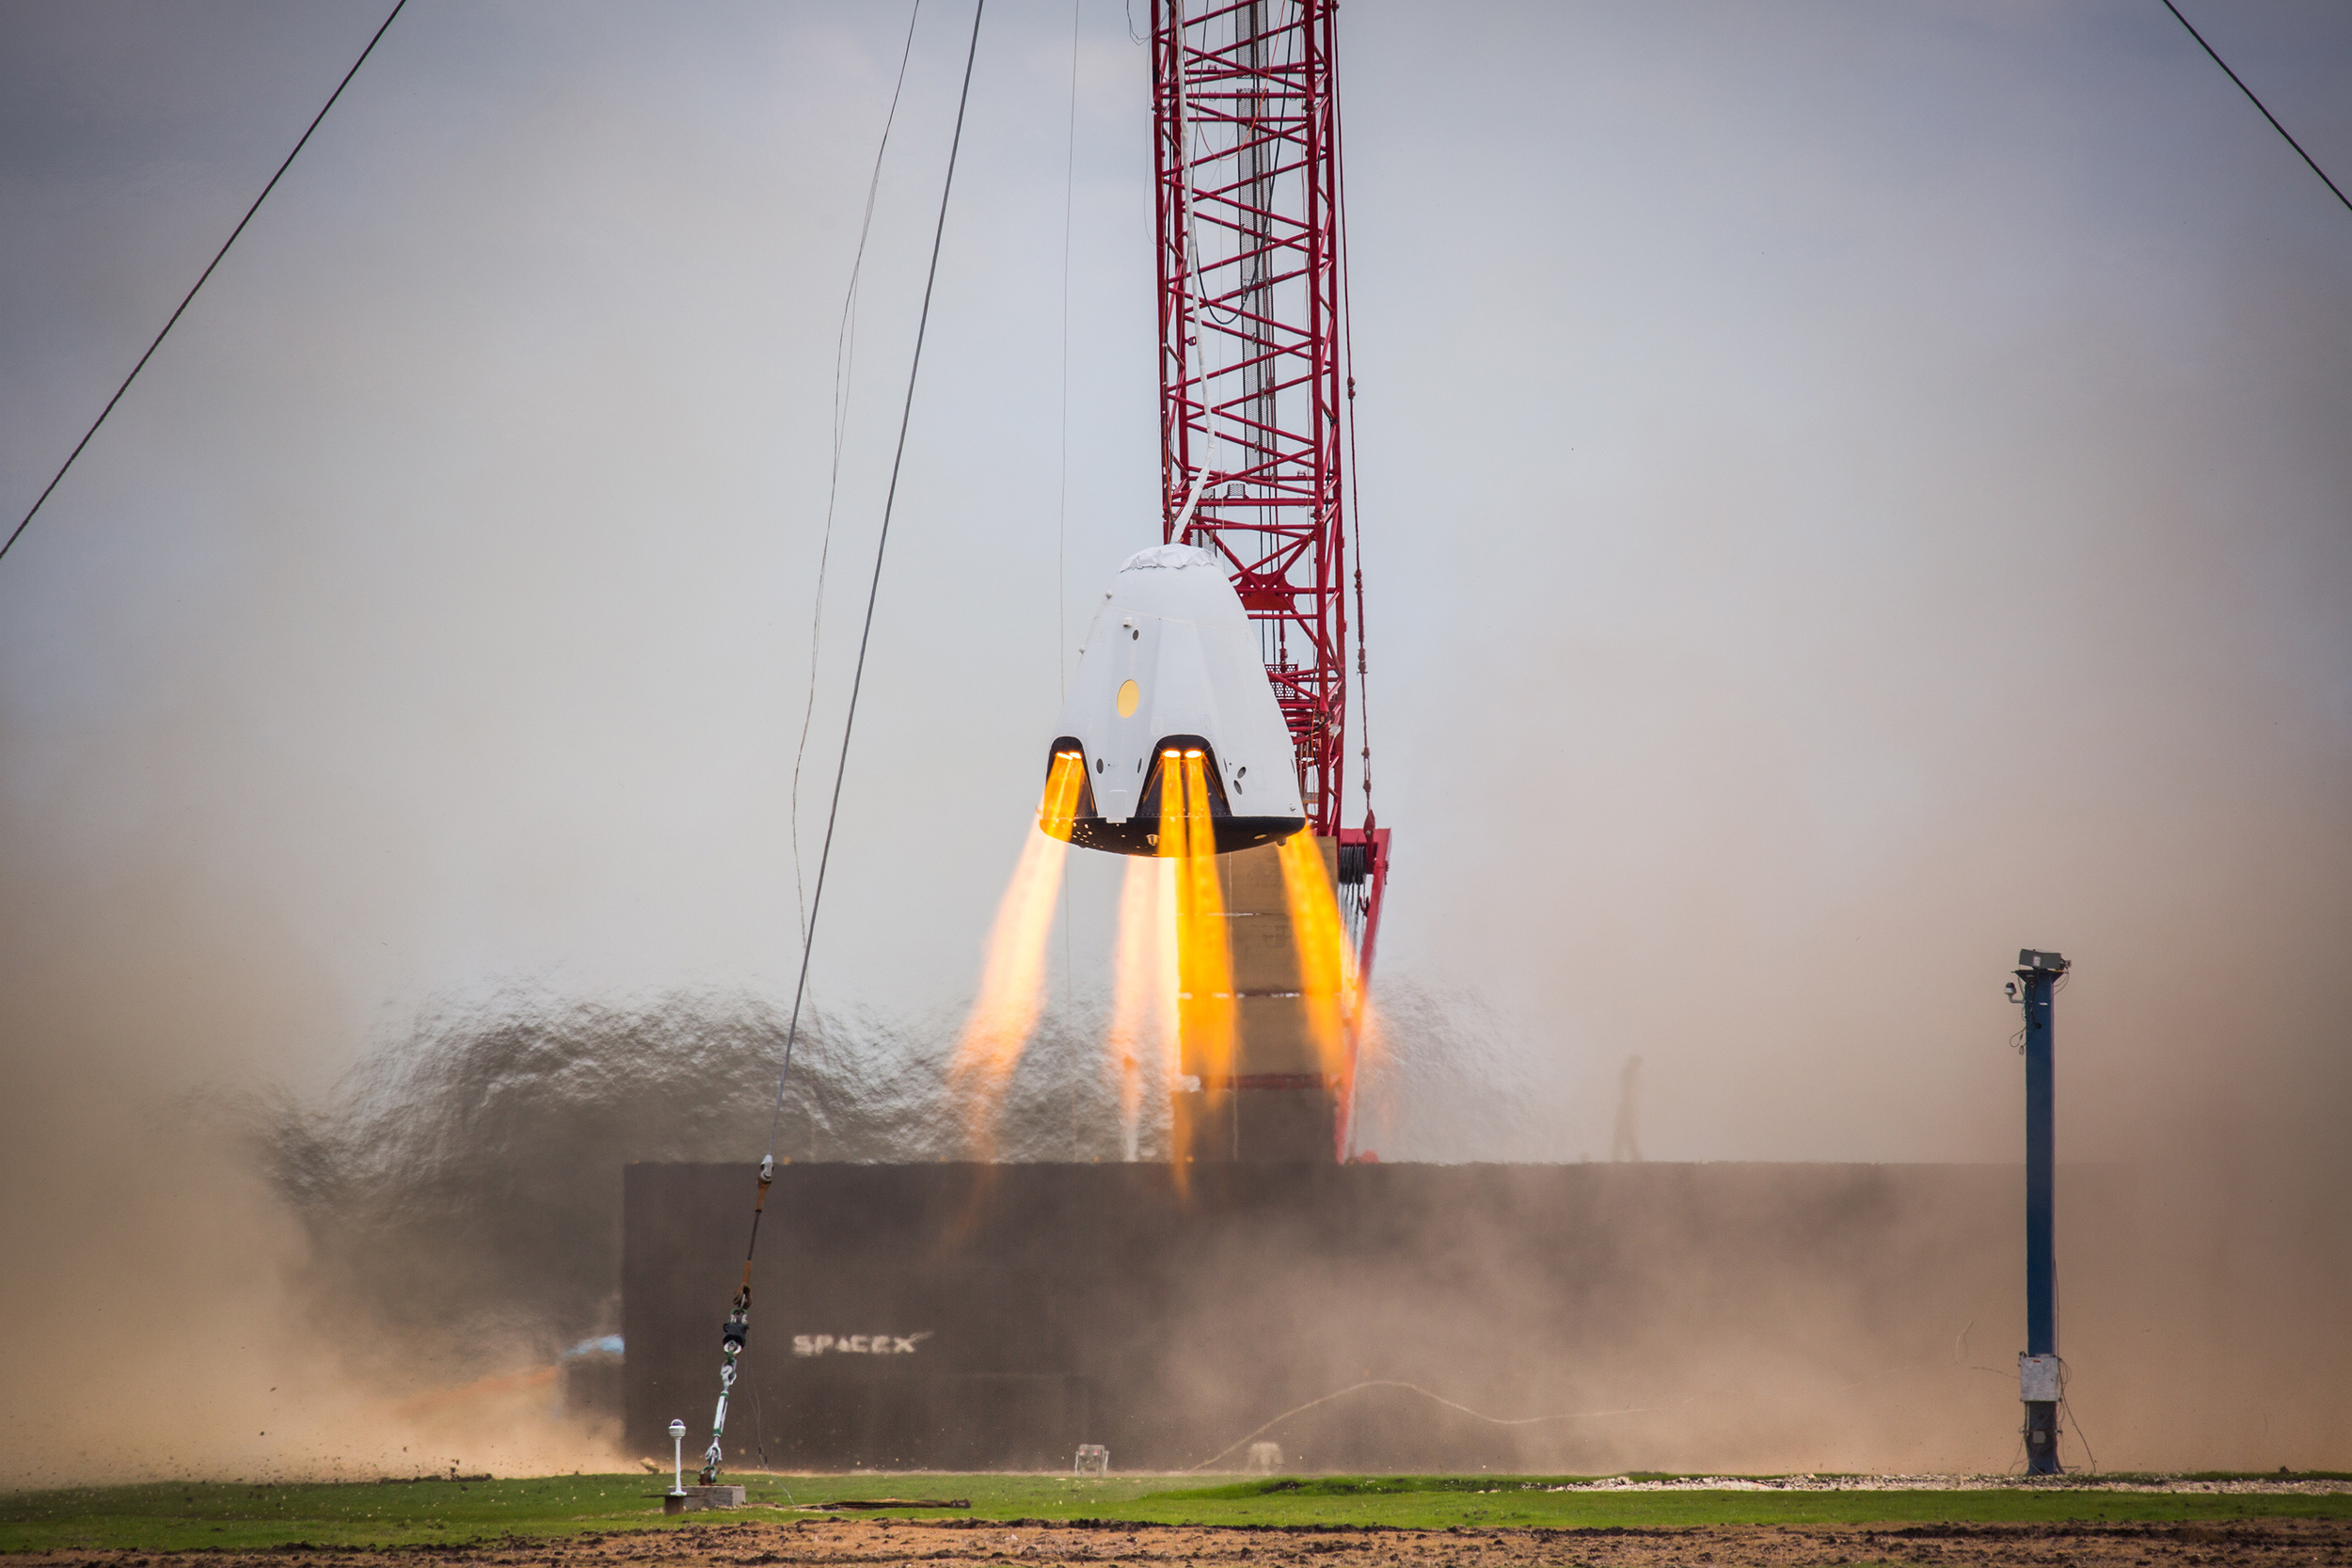  SpaceX tests the Crew Dragon's hover capability in Texas in their efforts to propulsively land the craft in the future. Photo Credit: SpaceX 